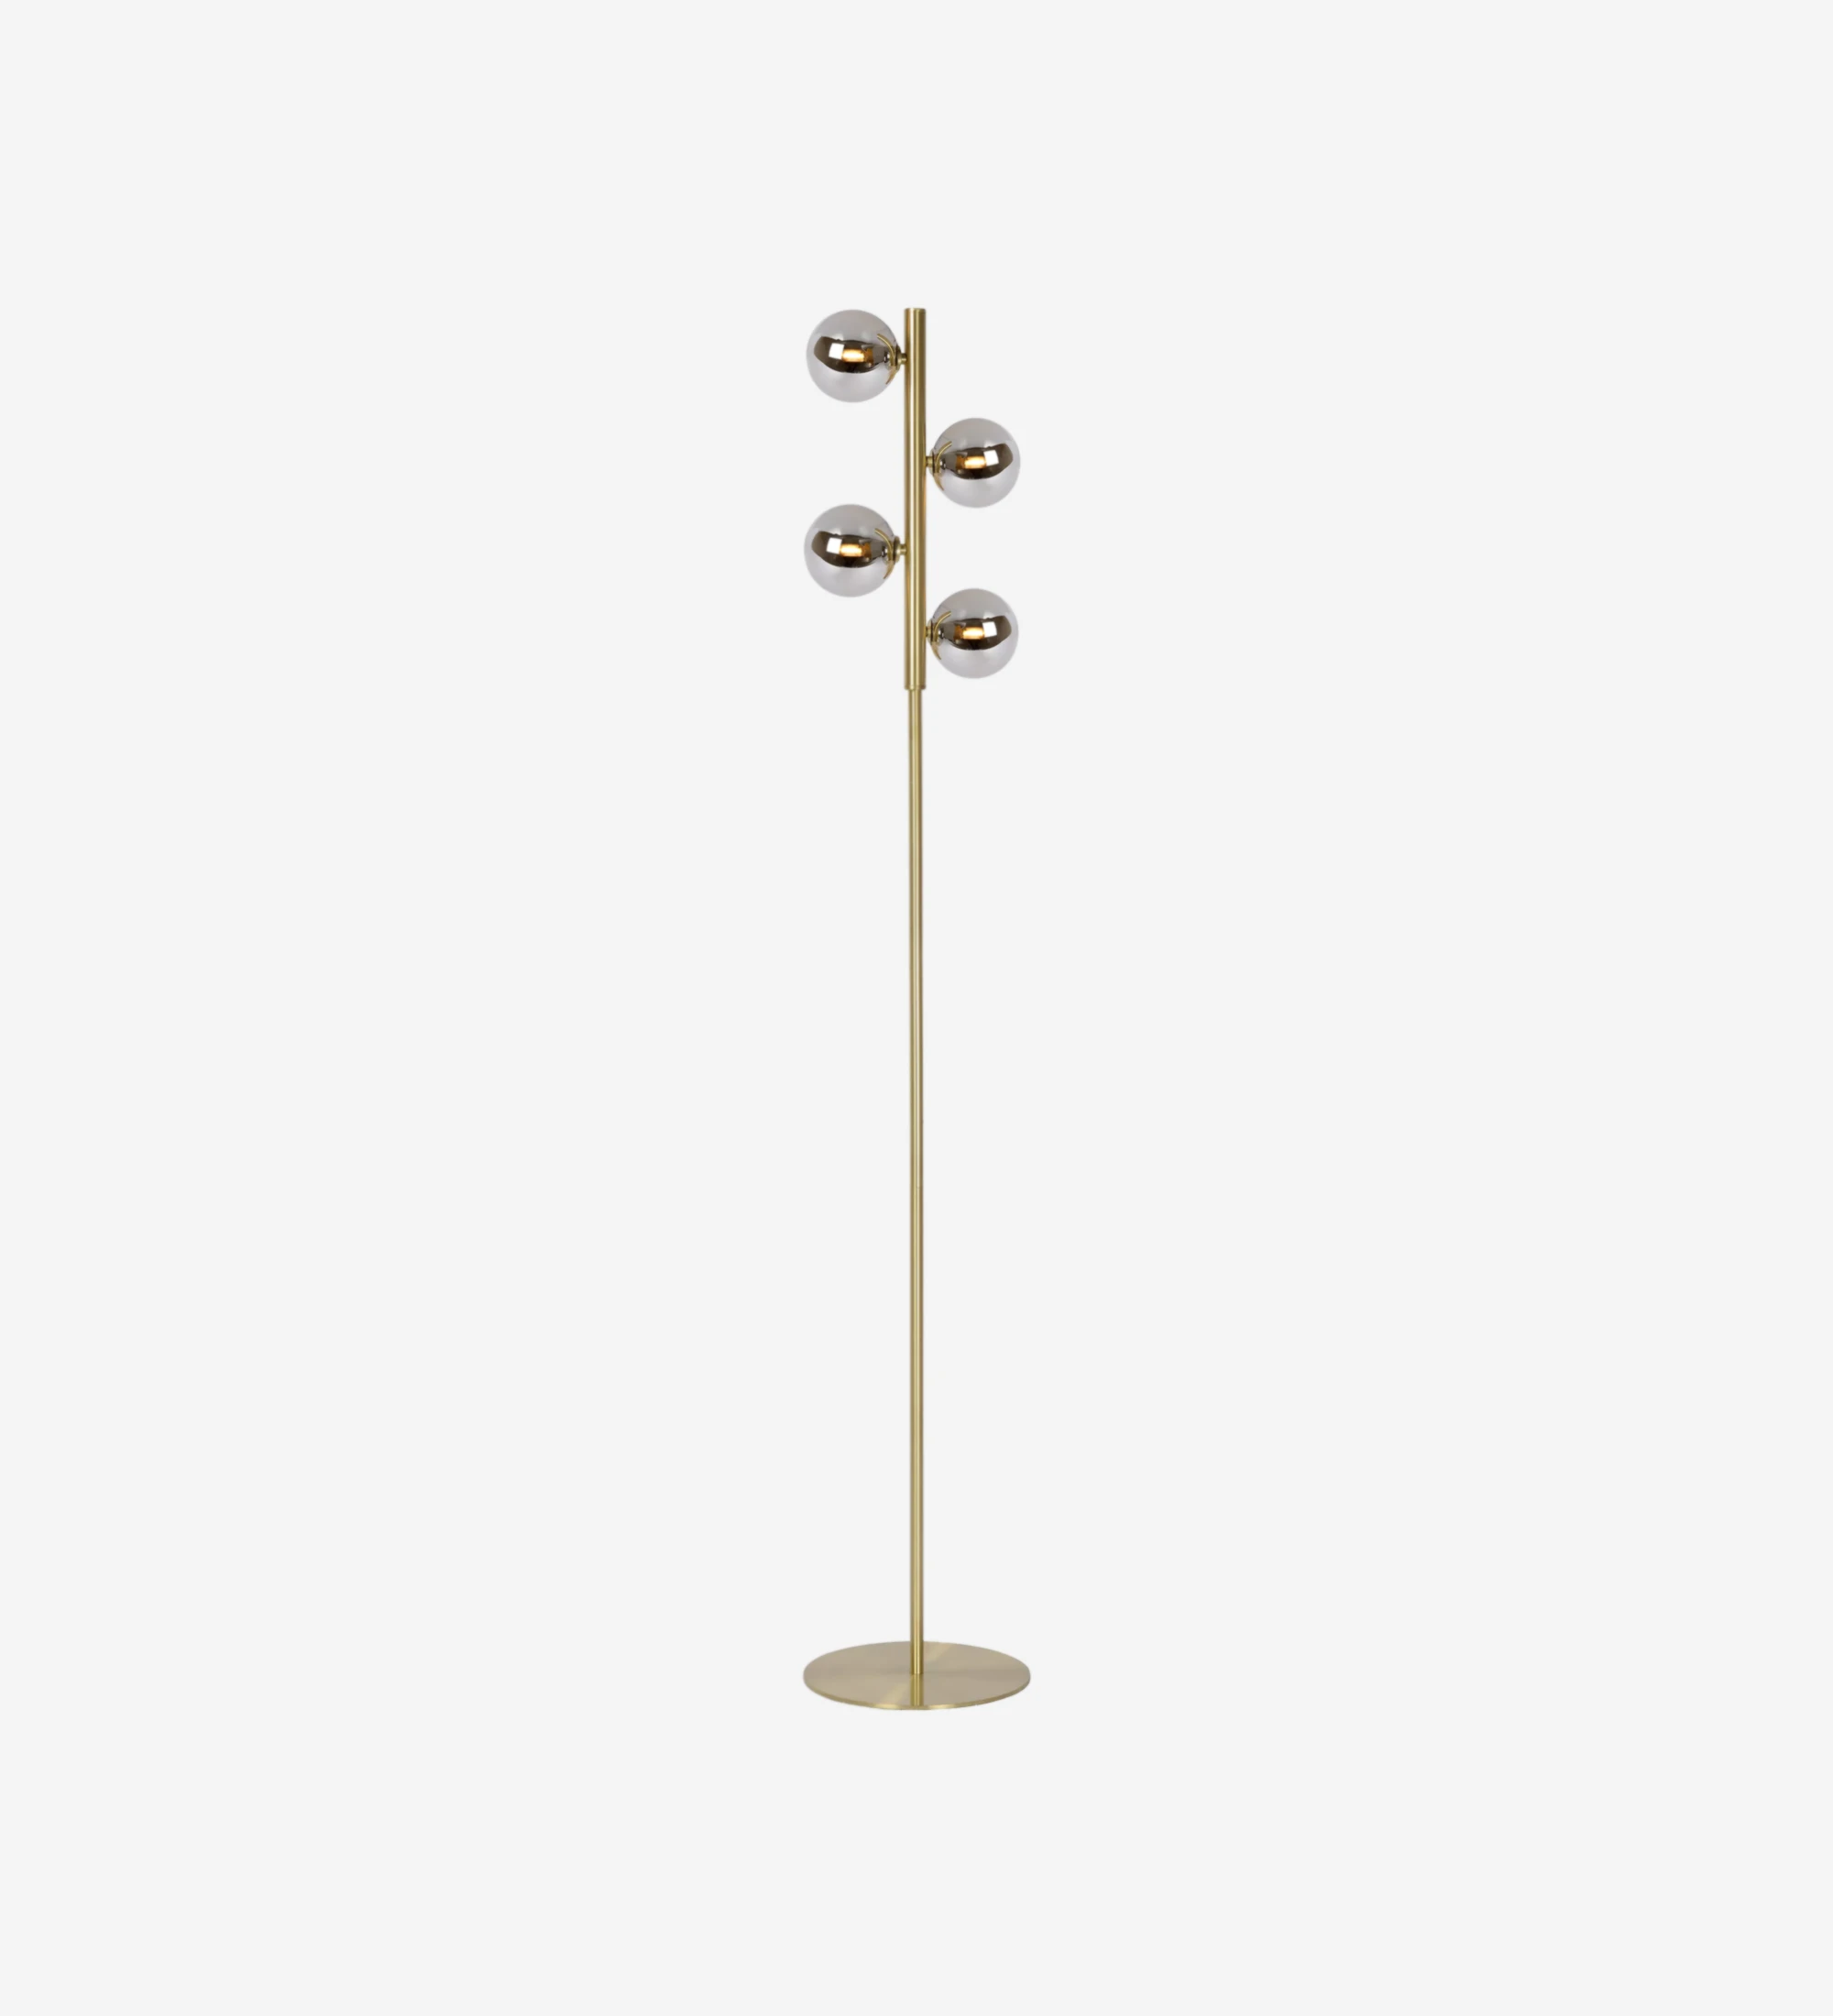 Floor lamp in matte gold steel and smoky glass diffusers.